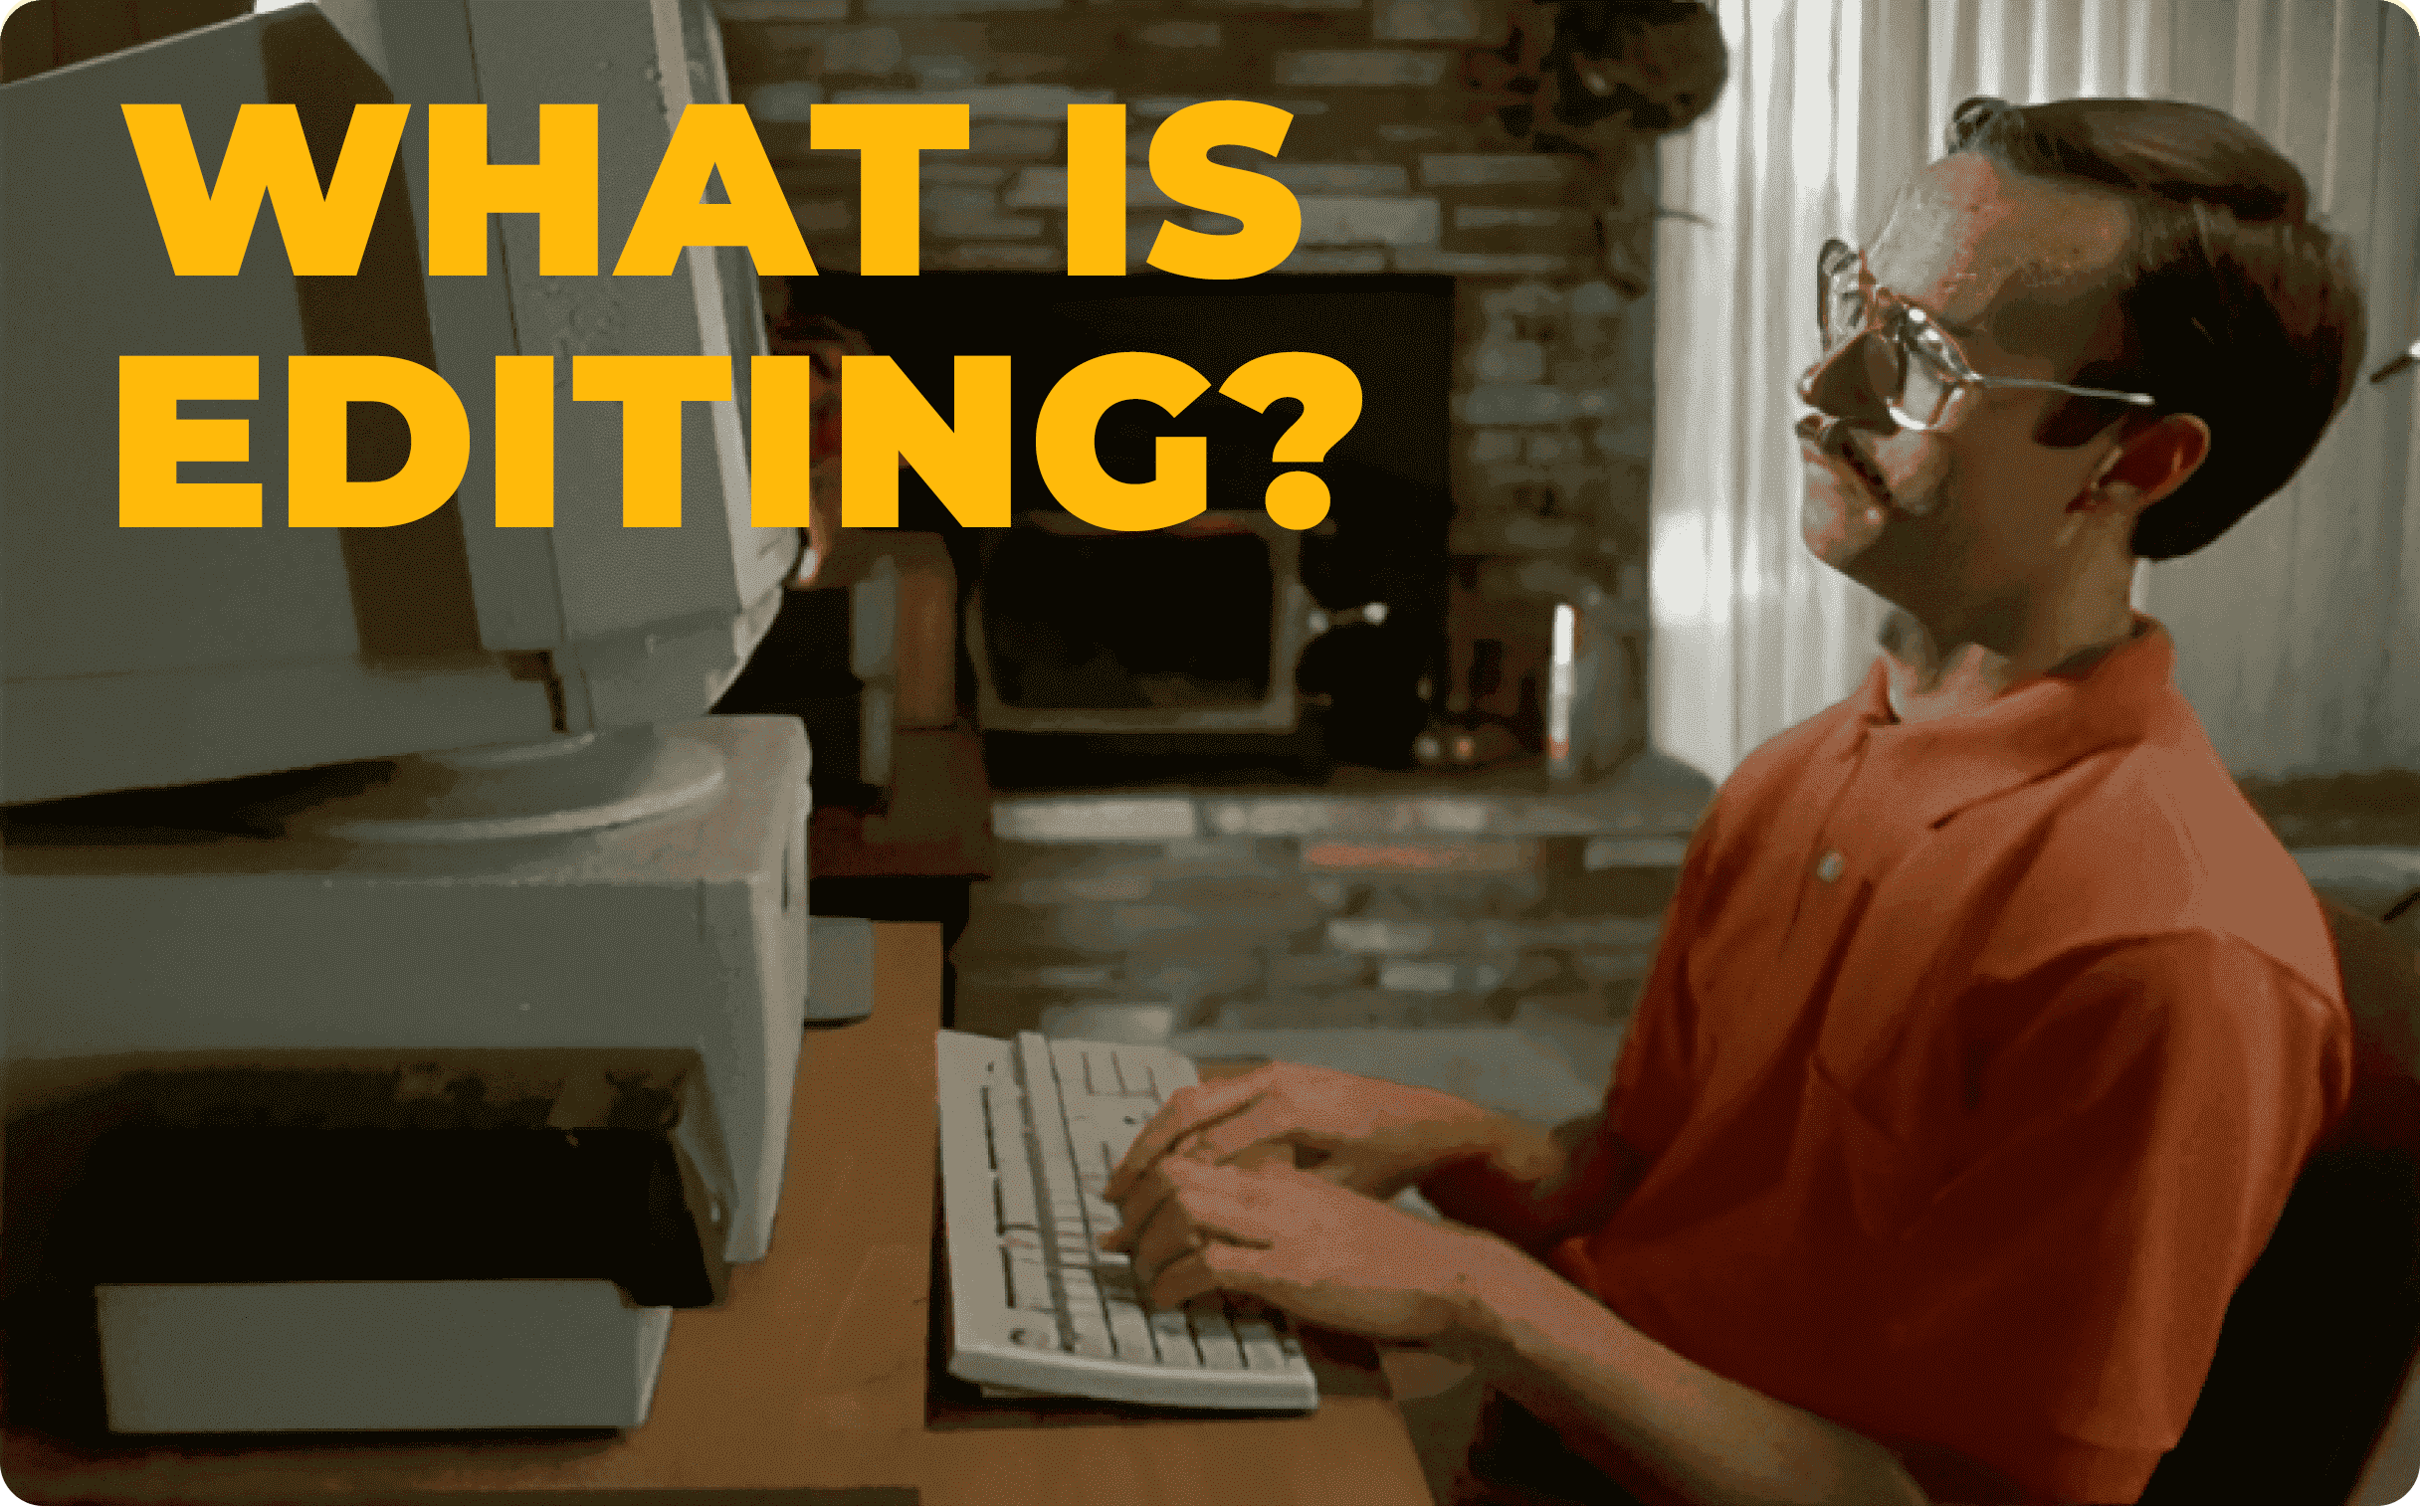 What is editing?